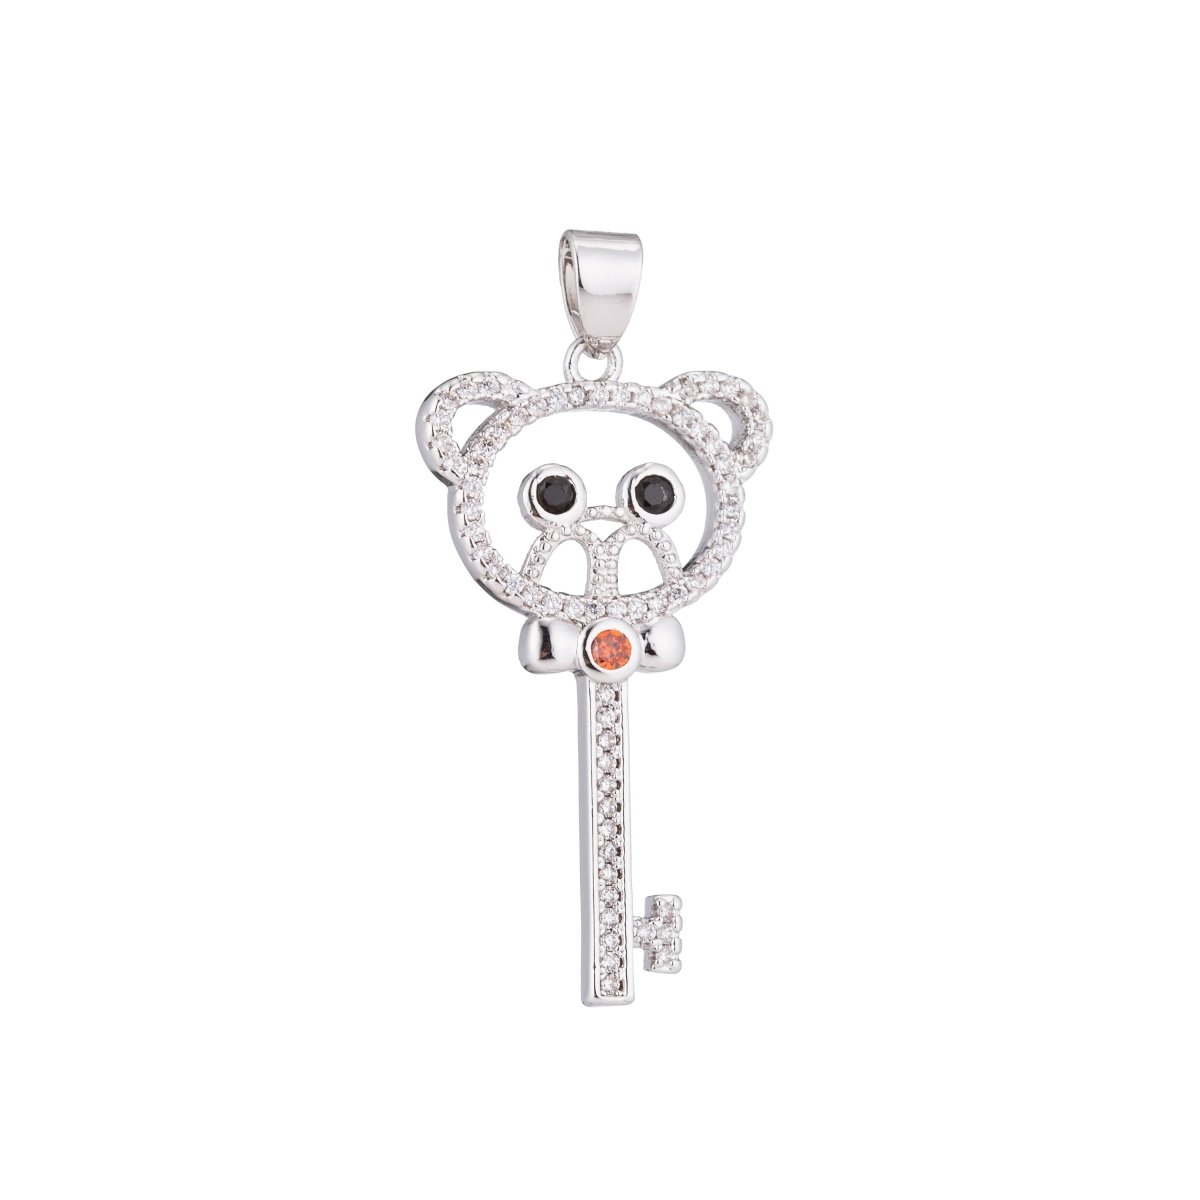 1pc Gold Fill Silver Teddy Key, Cute Bear, Key Locked Girl DIY Cubic Zirconia Necklace Pendant Beads Bail Charm for Jewelry Making, CL-H-90 - DLUXCA